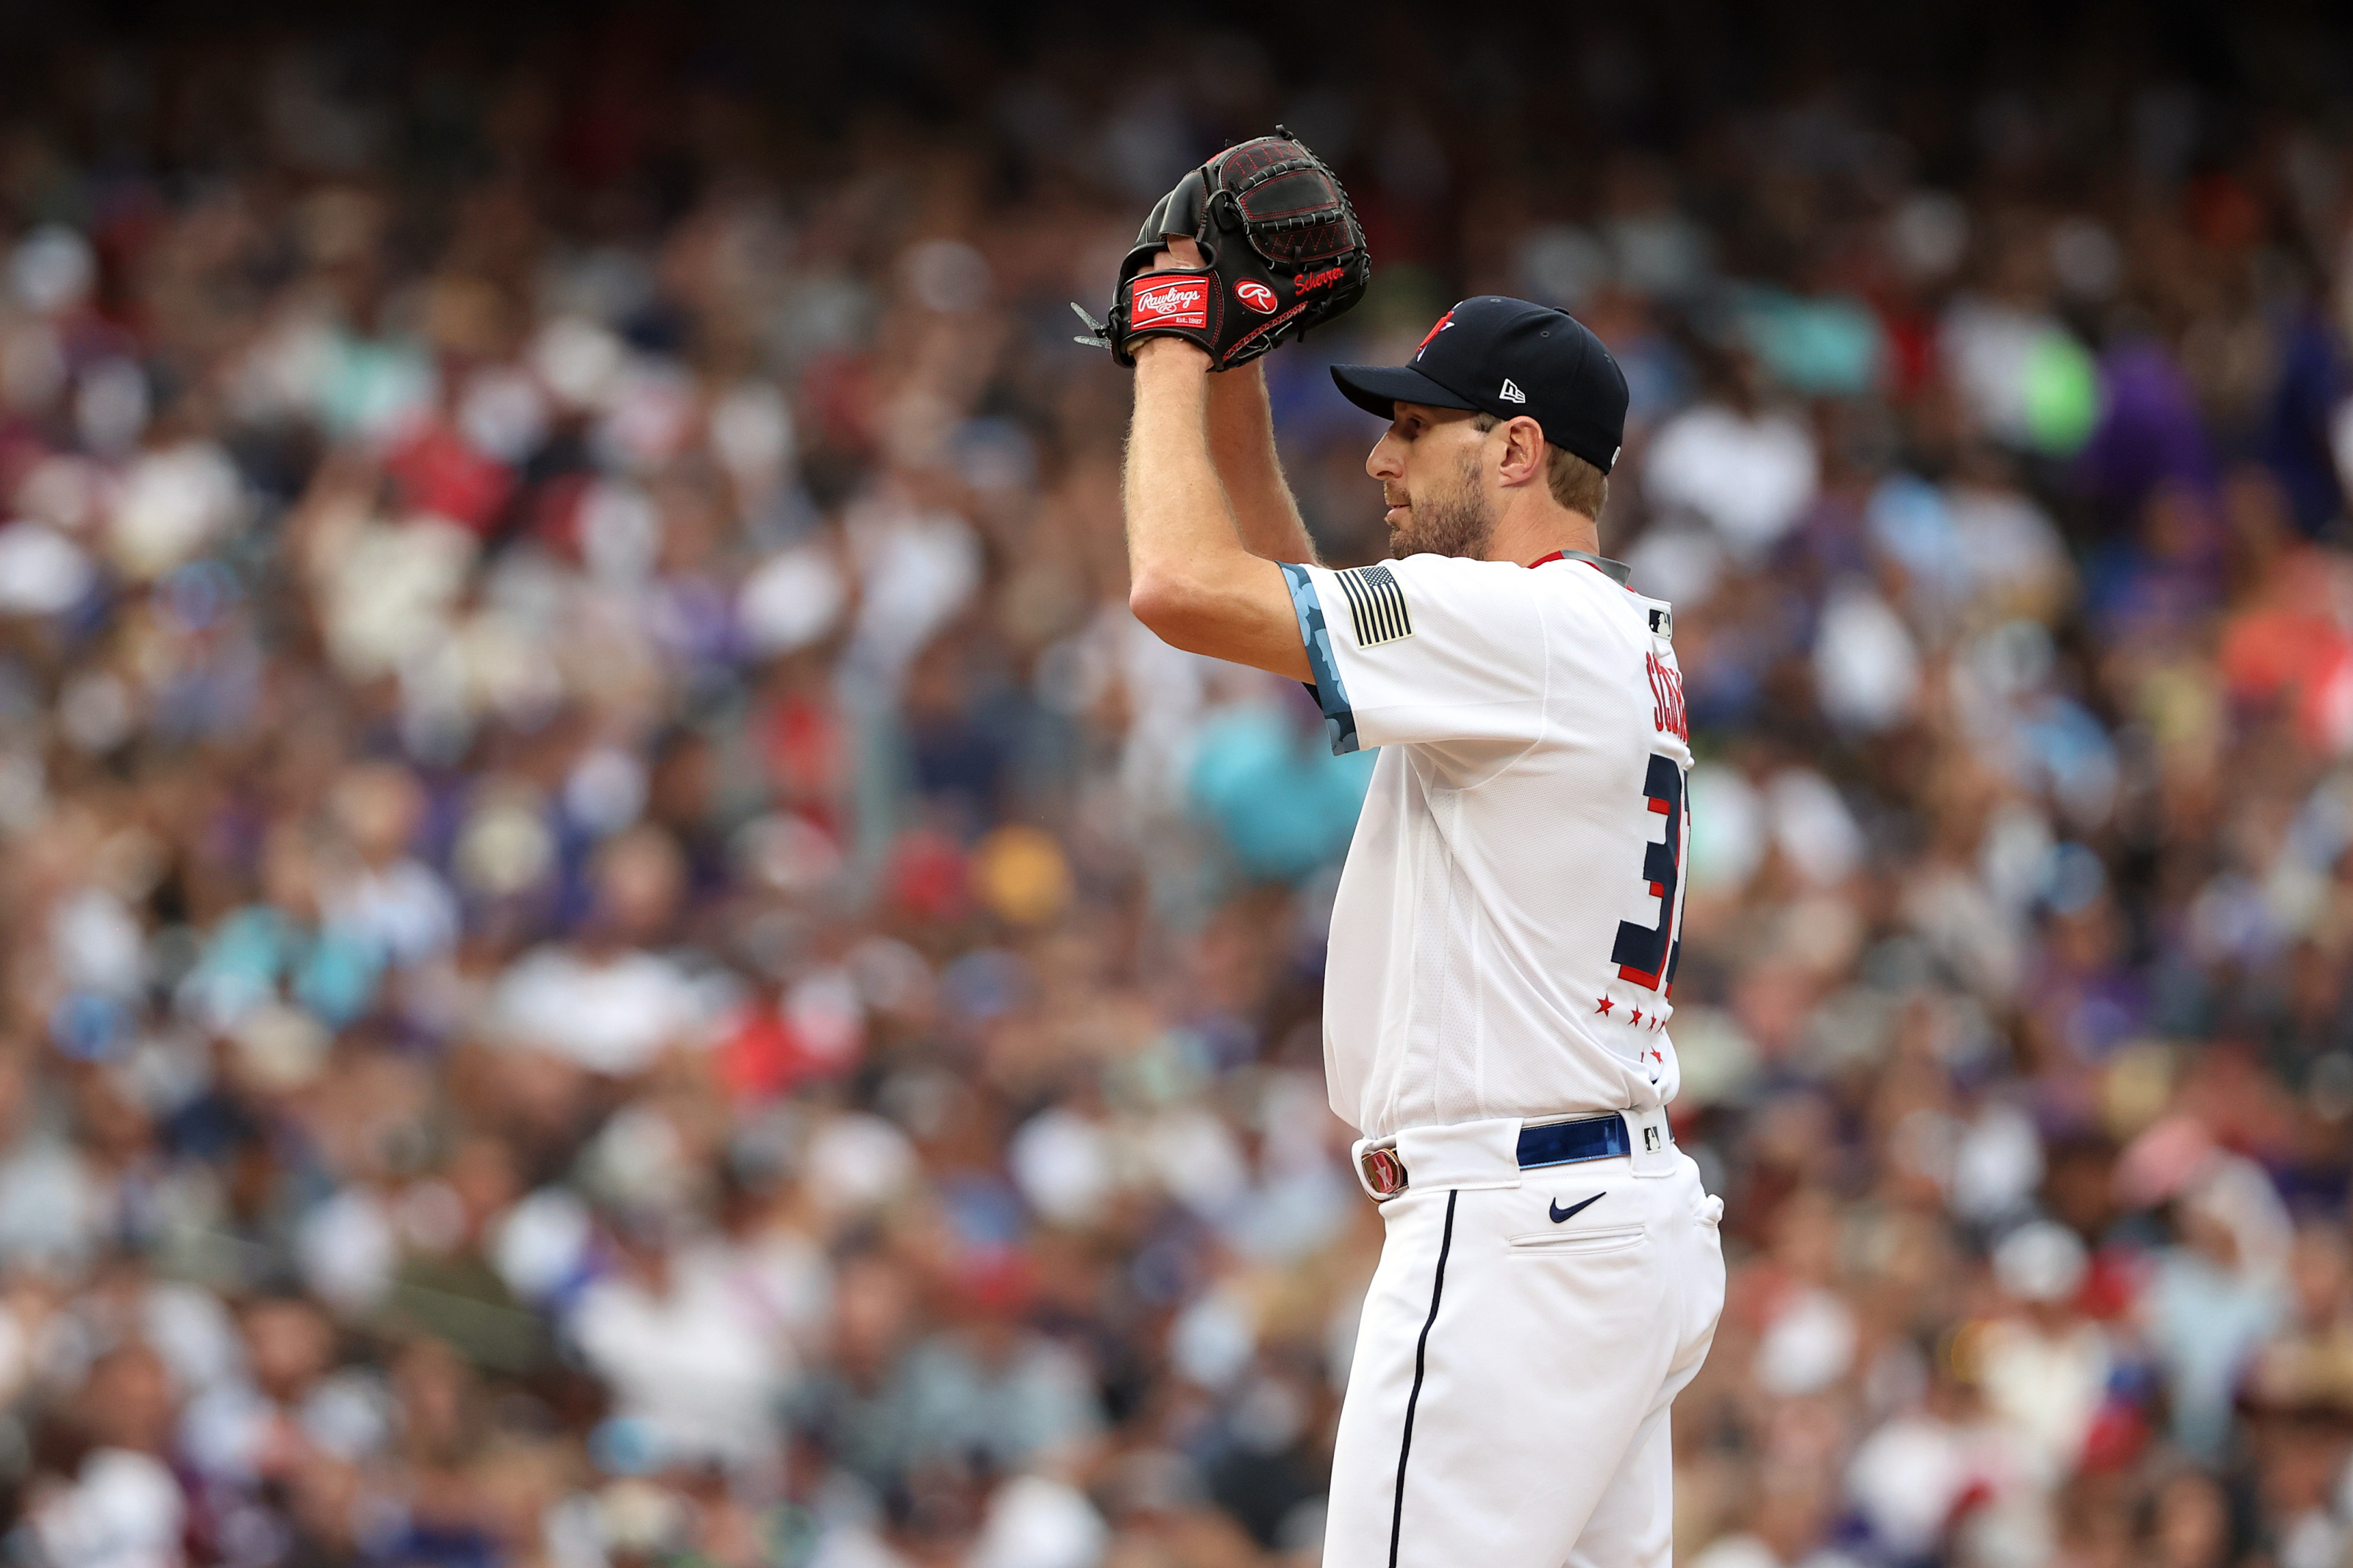 MLB Rumors: Best Max Scherzer trades for Braves, Cardinals, and Giants